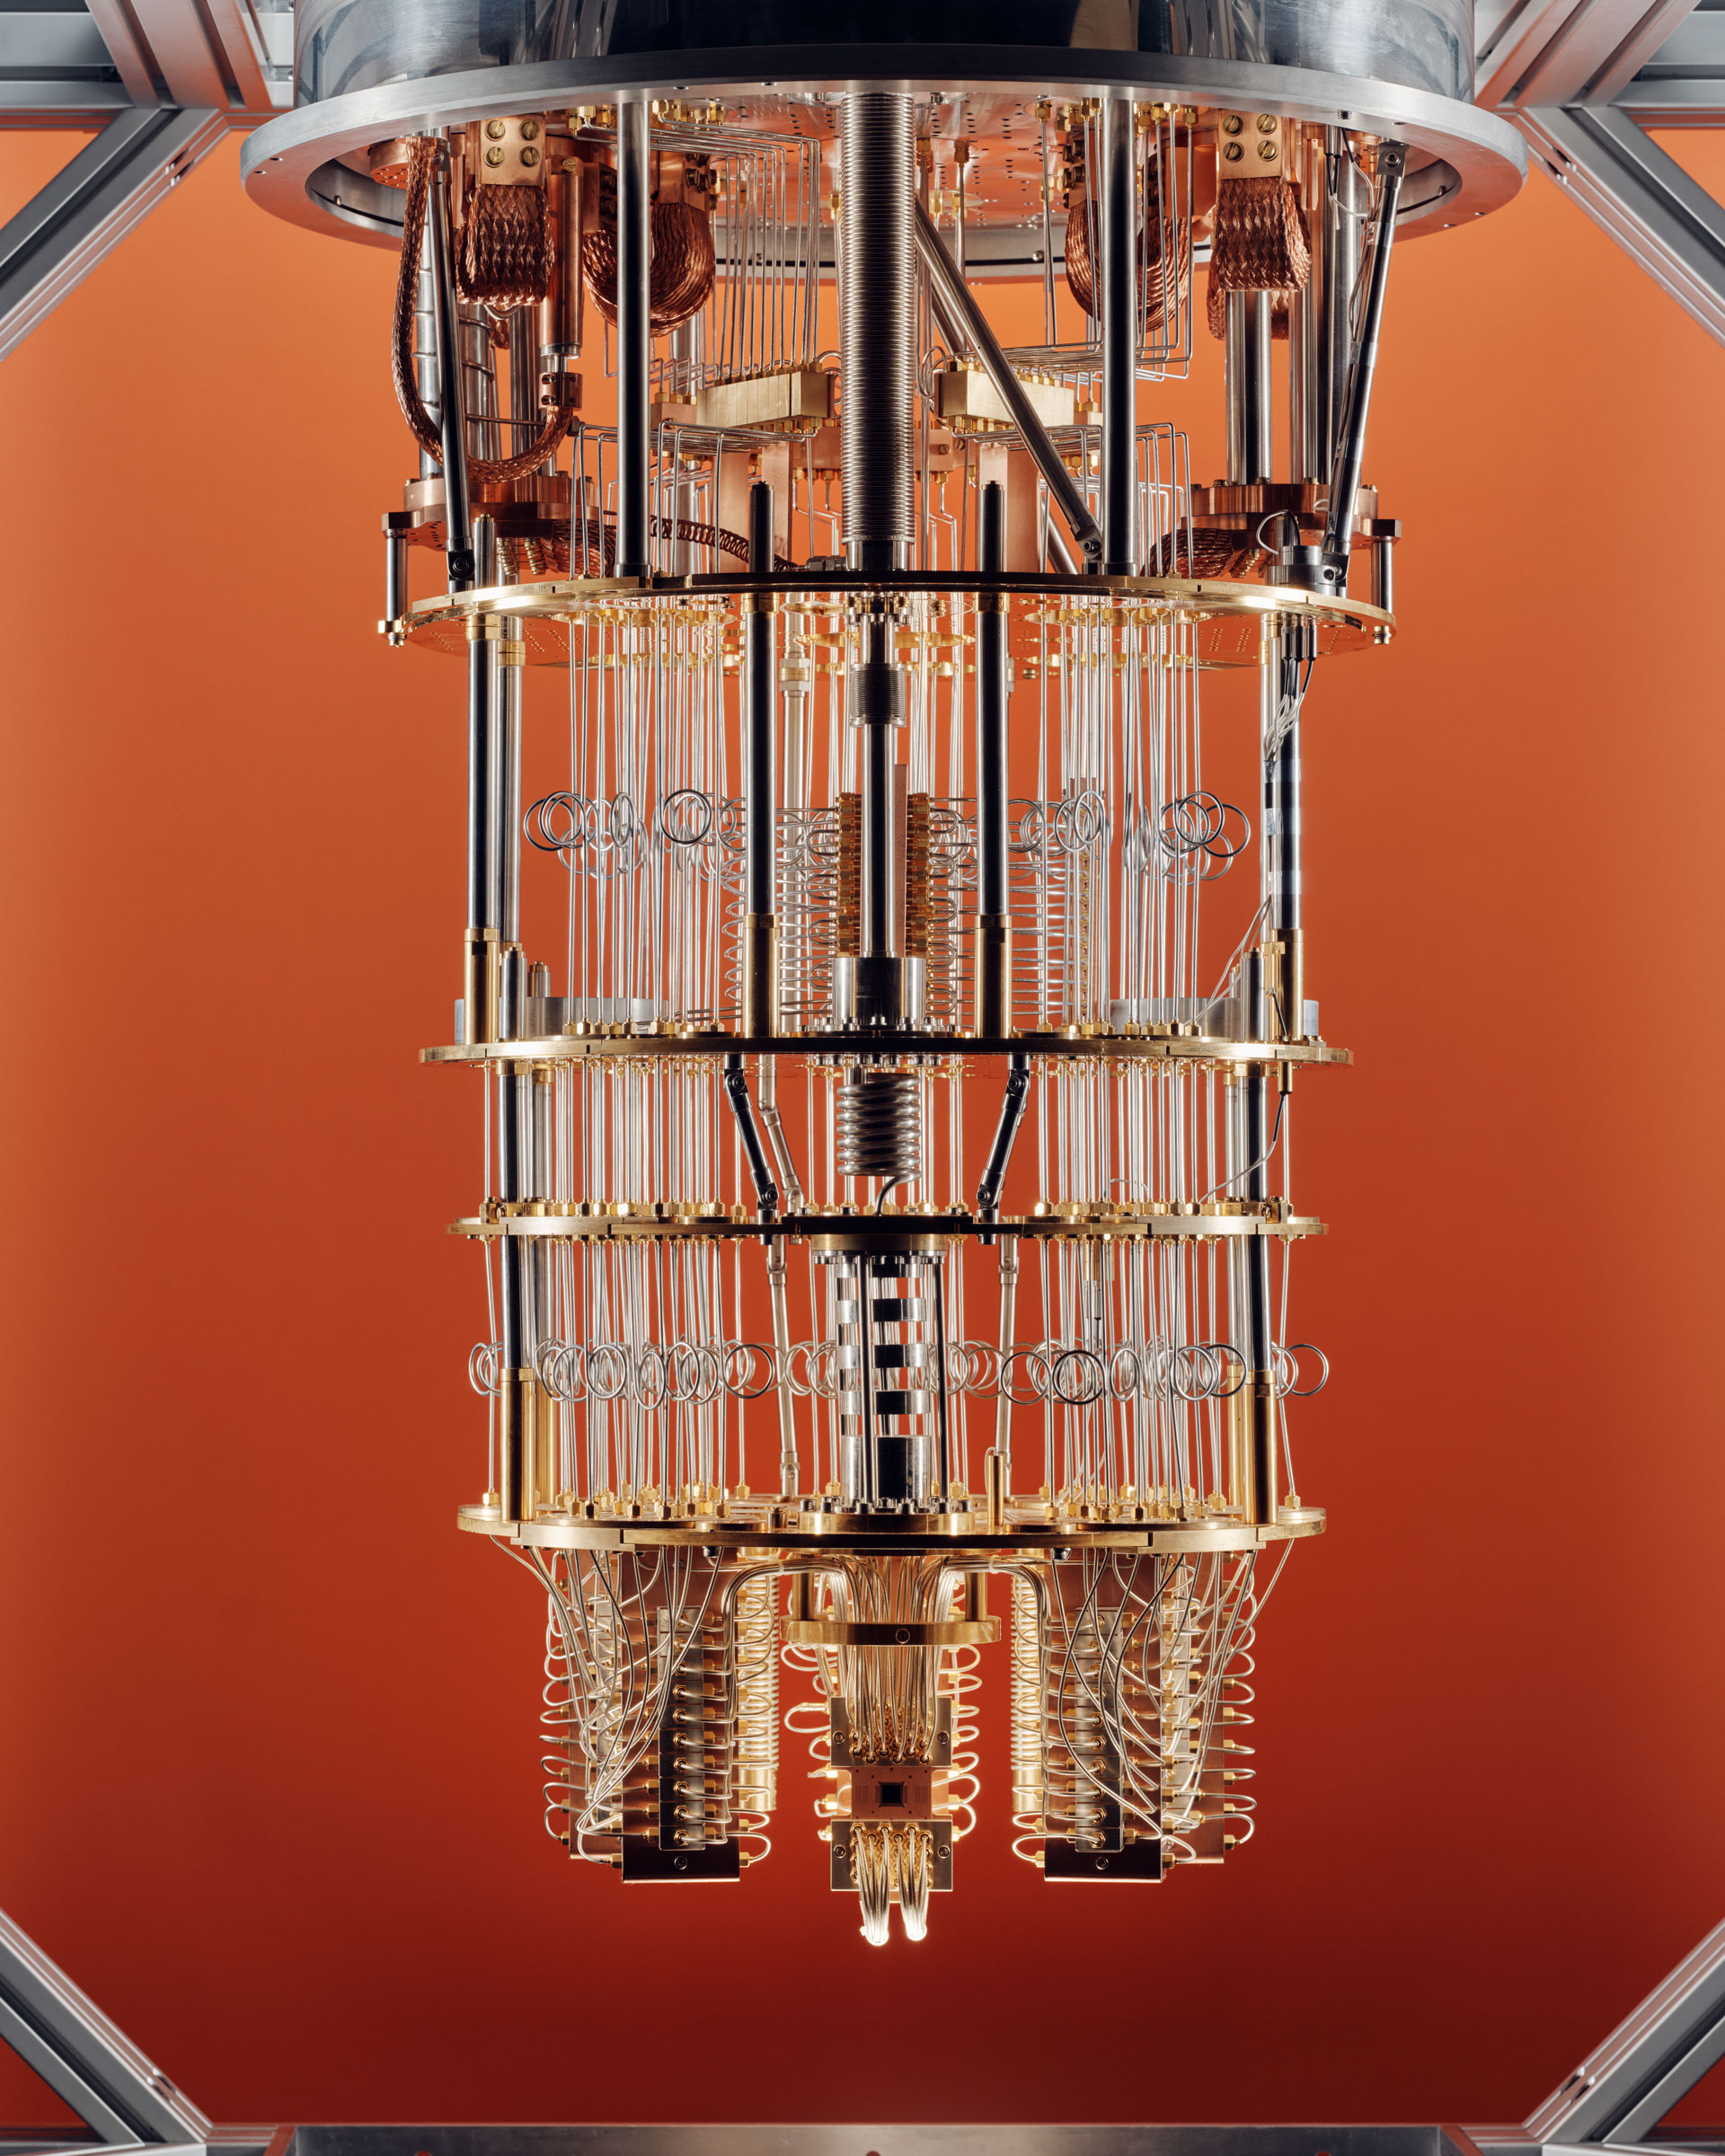 The full “chandelier” inside a quantum computer. (Thomas Prior for TIME)